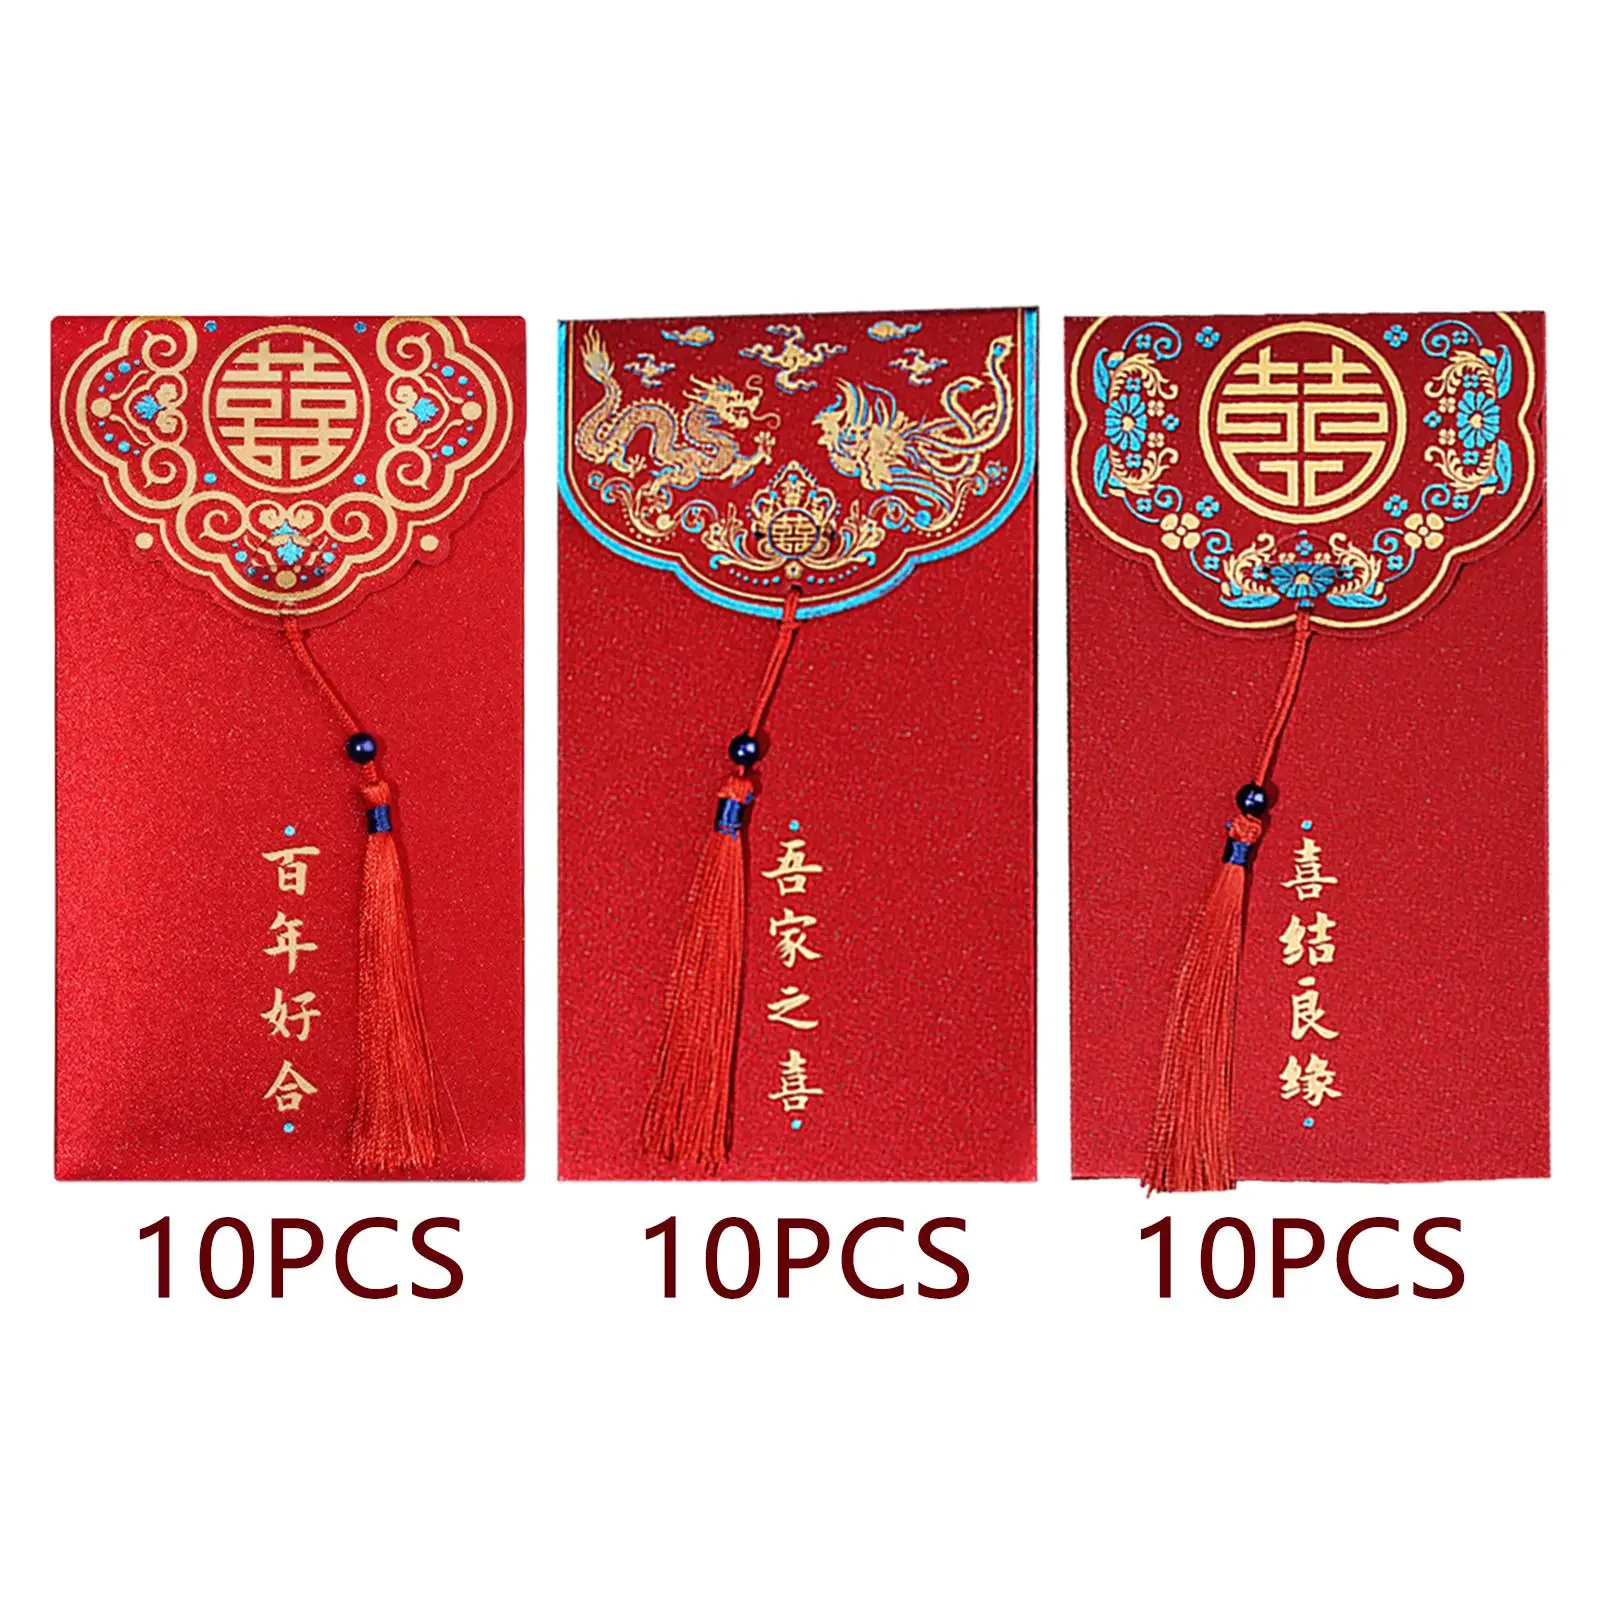 Set of 10 Red Envelope Lucky Money envelopes Chinese Hong Bao Gift Wrap Bags Red Pocket Cash Envelope for New Year Wedding